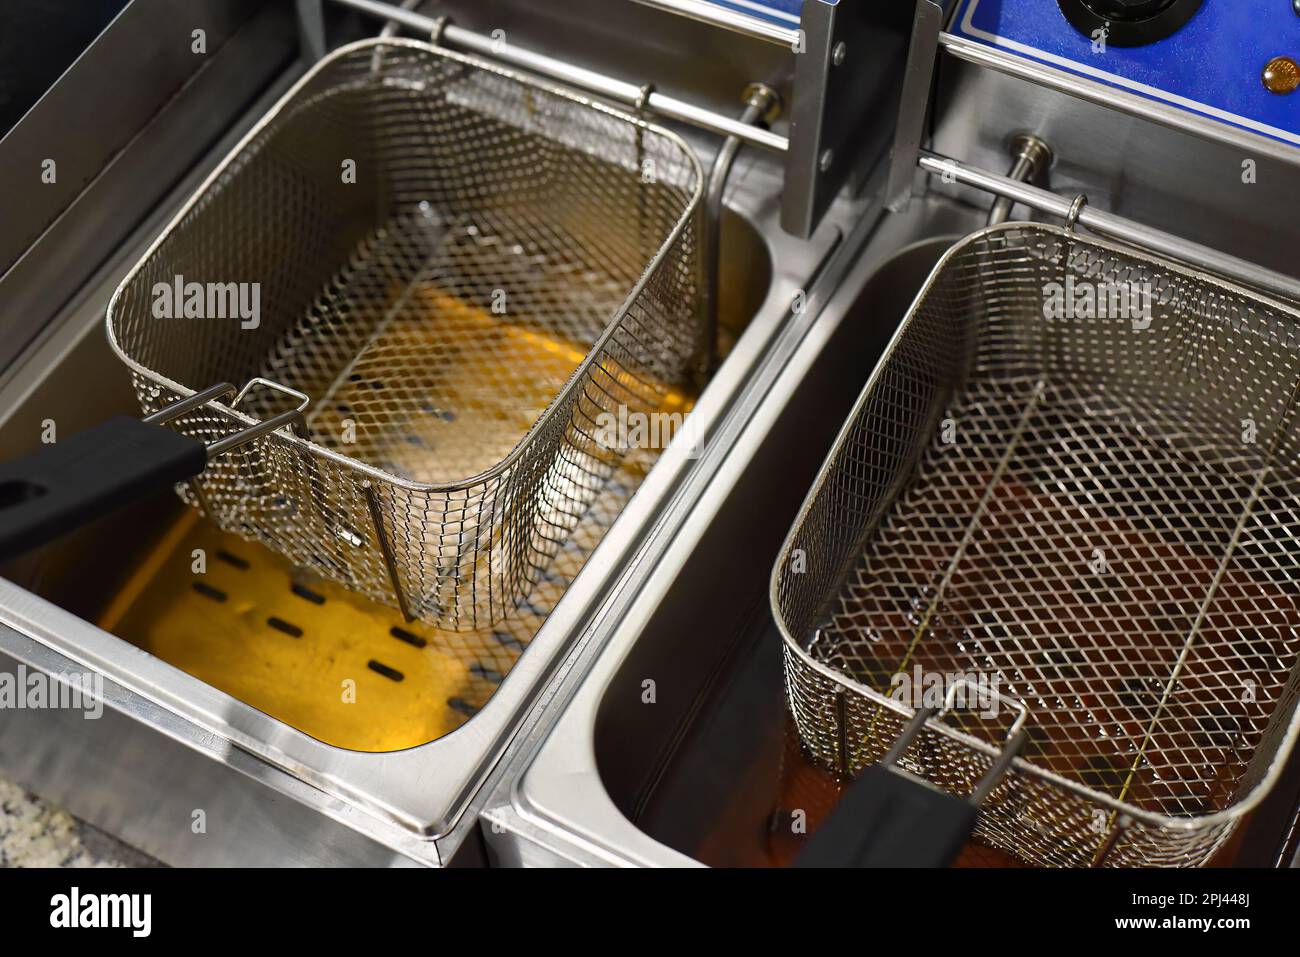 Commercial Deep Fryer Baskets In India, Deep Fry Basket (Stainless Steel)